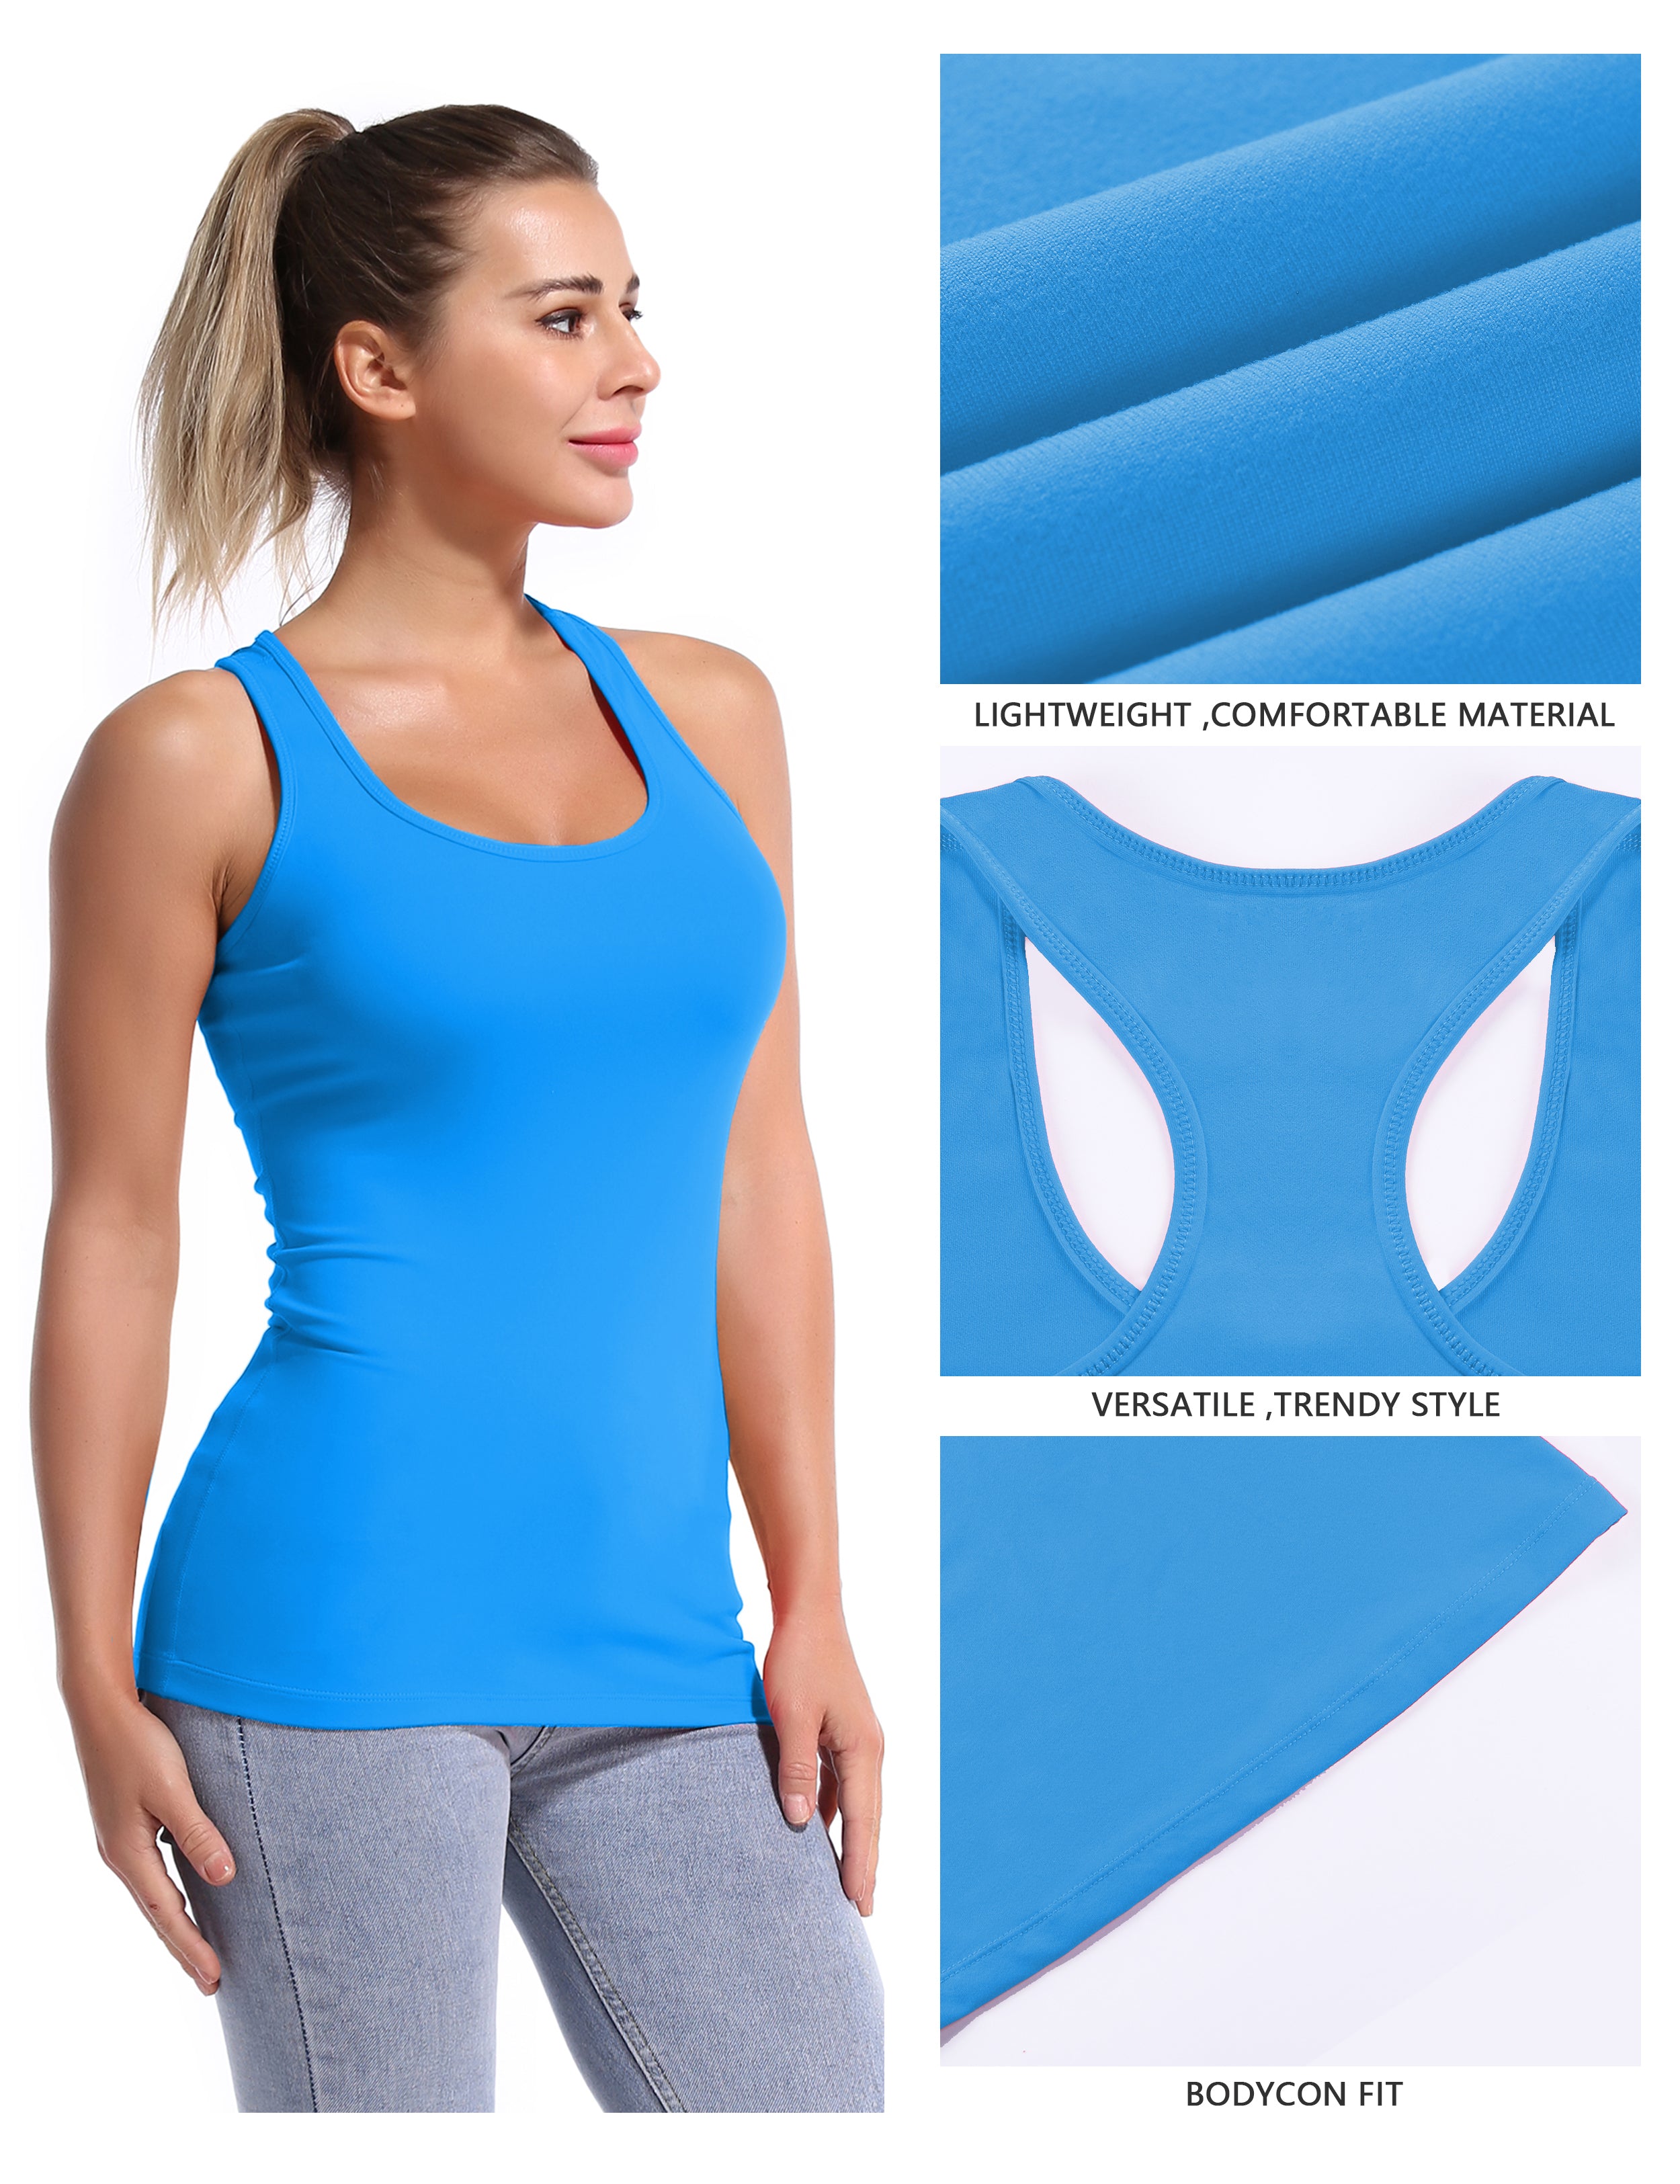 Racerback Athletic Tank Tops deepskyblue 92%Nylon/8%Spandex(Cotton Soft) Designed for Pilates Tight Fit So buttery soft, it feels weightless Sweat-wicking Four-way stretch Breathable Contours your body Sits below the waistband for moderate, everyday coverage